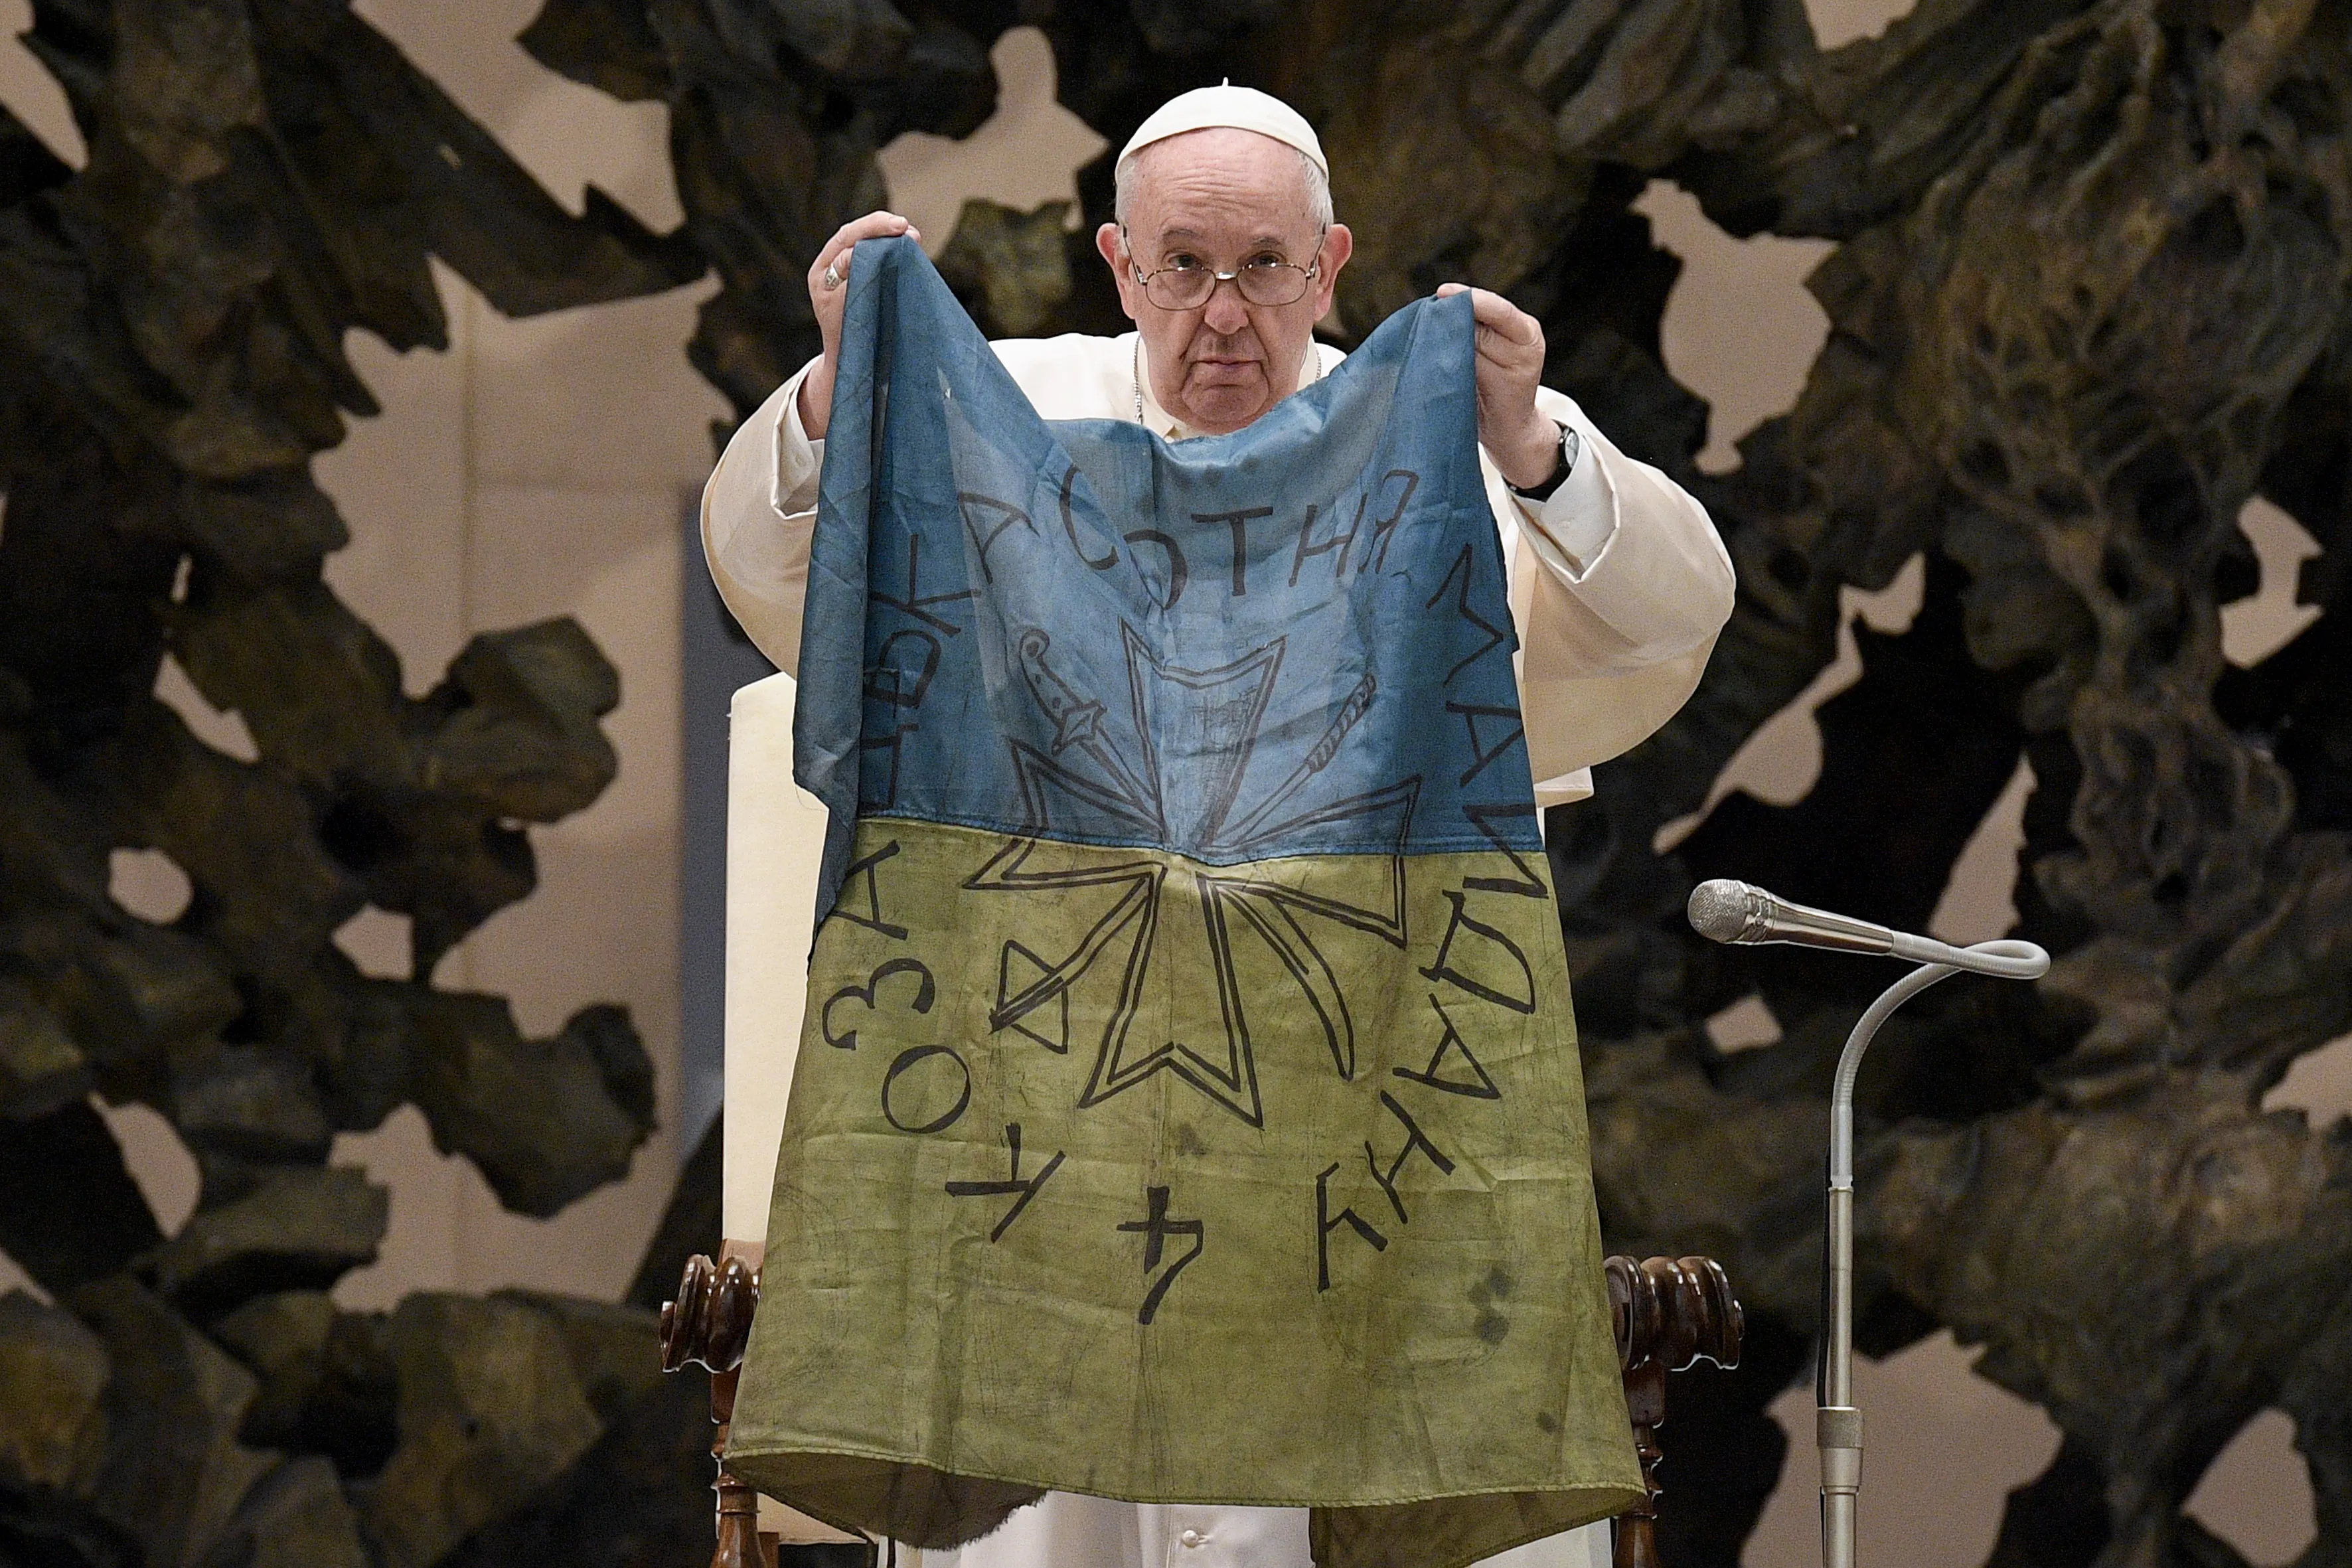 Pope Francis holds up a flag which he said was brought to him from “the martyred city” of Bucha, Ukraine at his general audience on April 6, 2022.?w=200&h=150